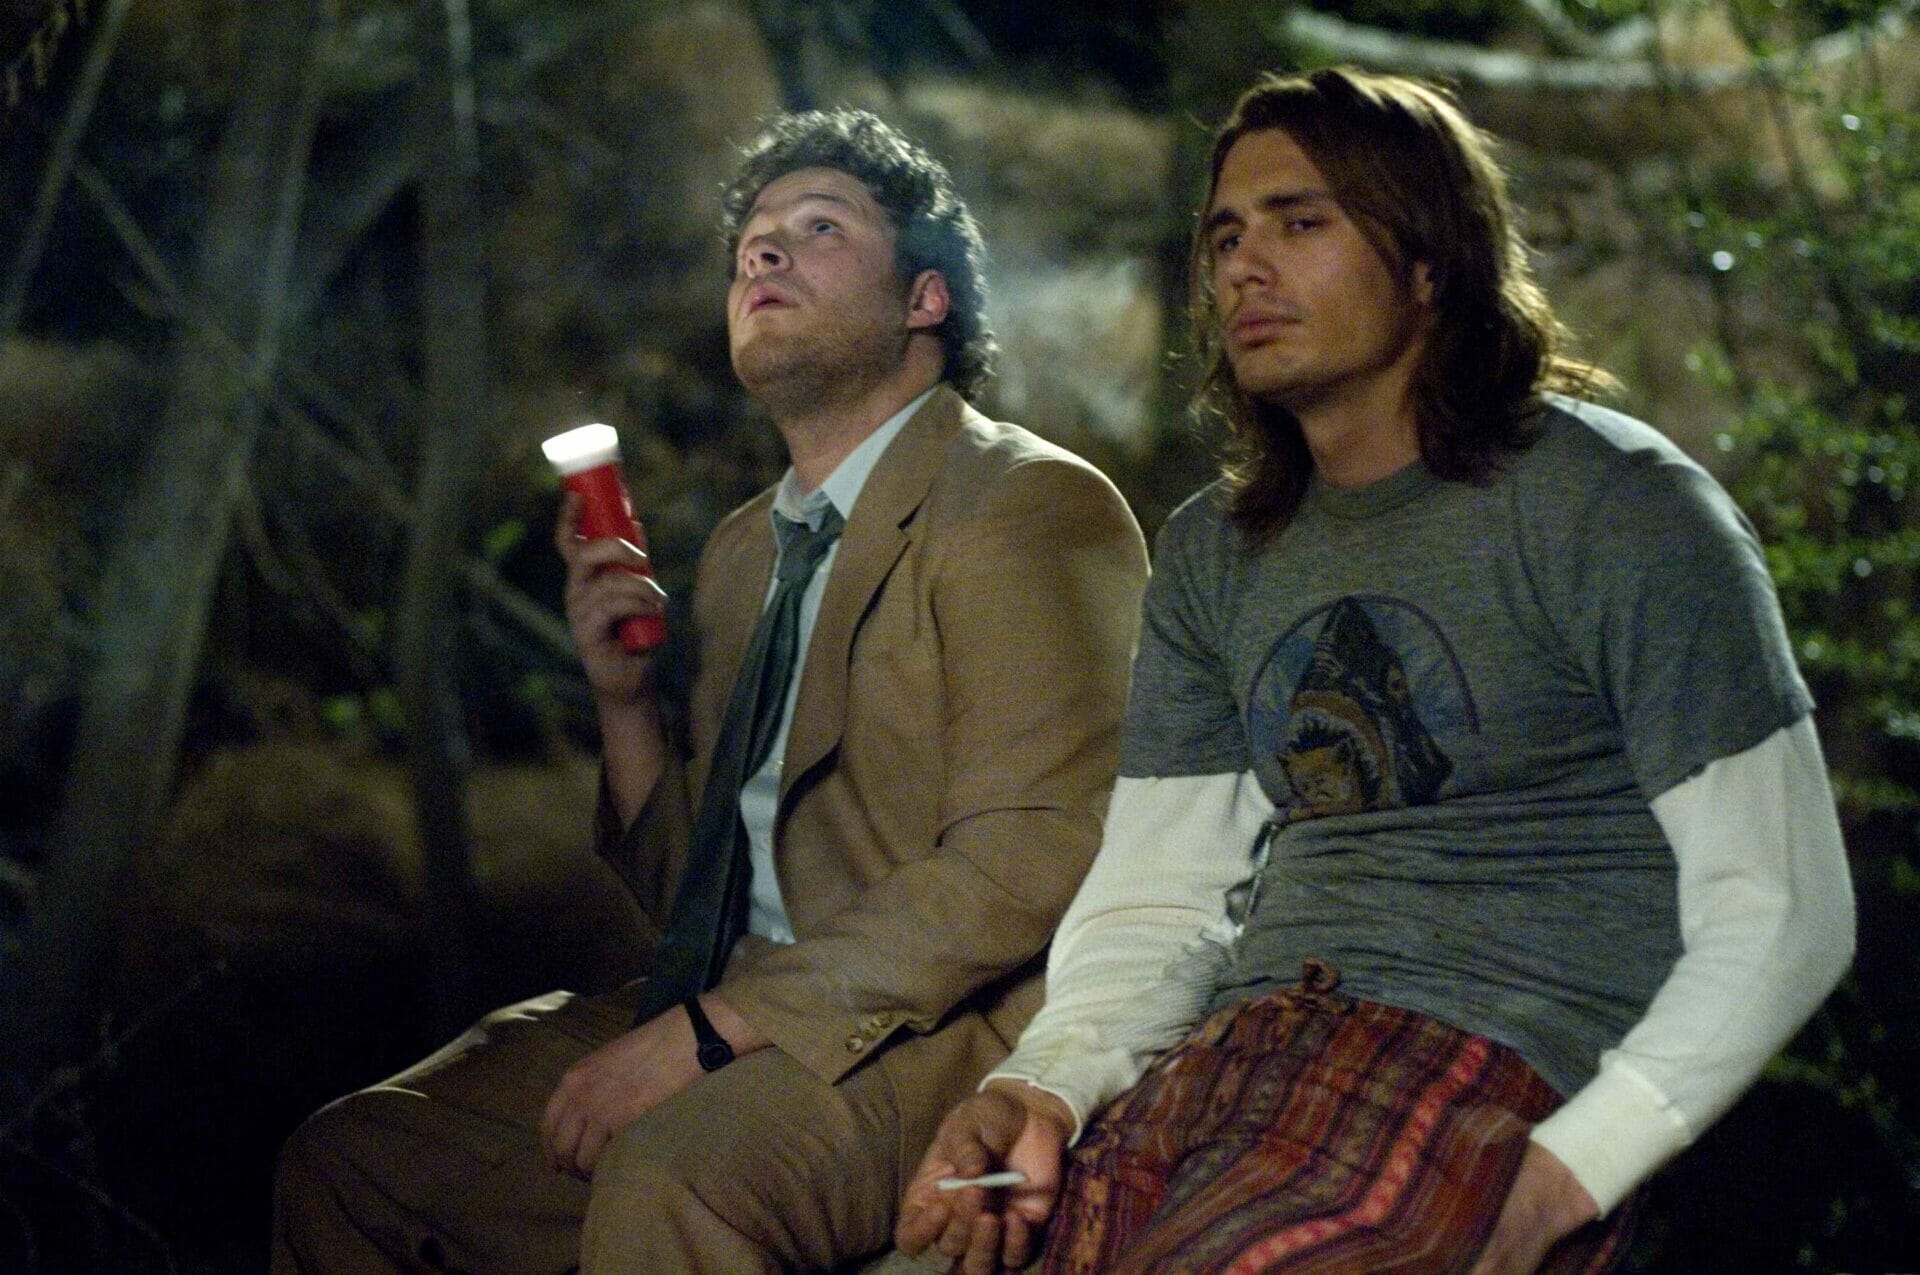 Action comedy movies: Pineapple Express (2008)